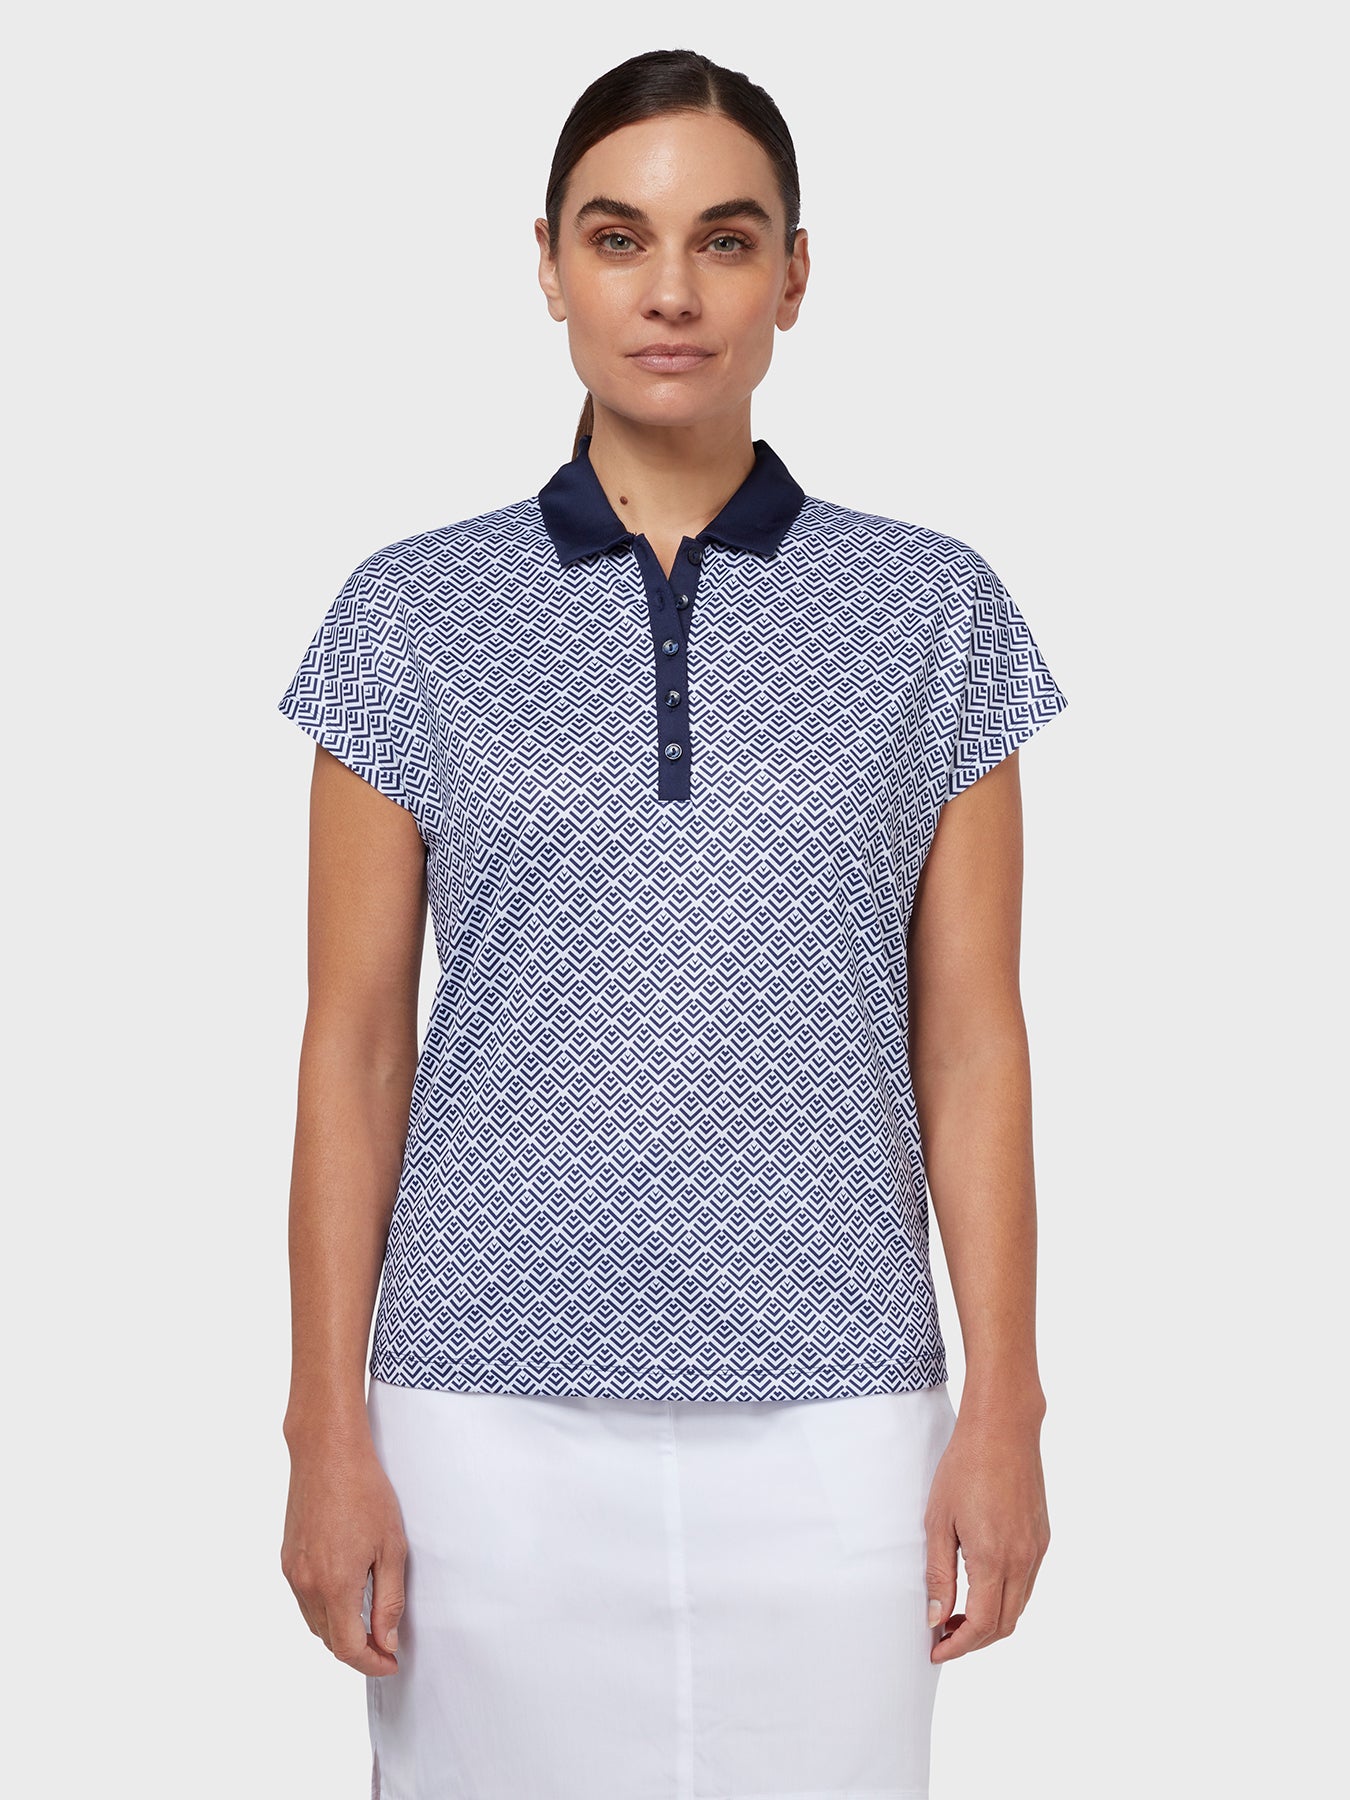 View Chev Printed Womens Polo In Blue Geo Brilliant White L information